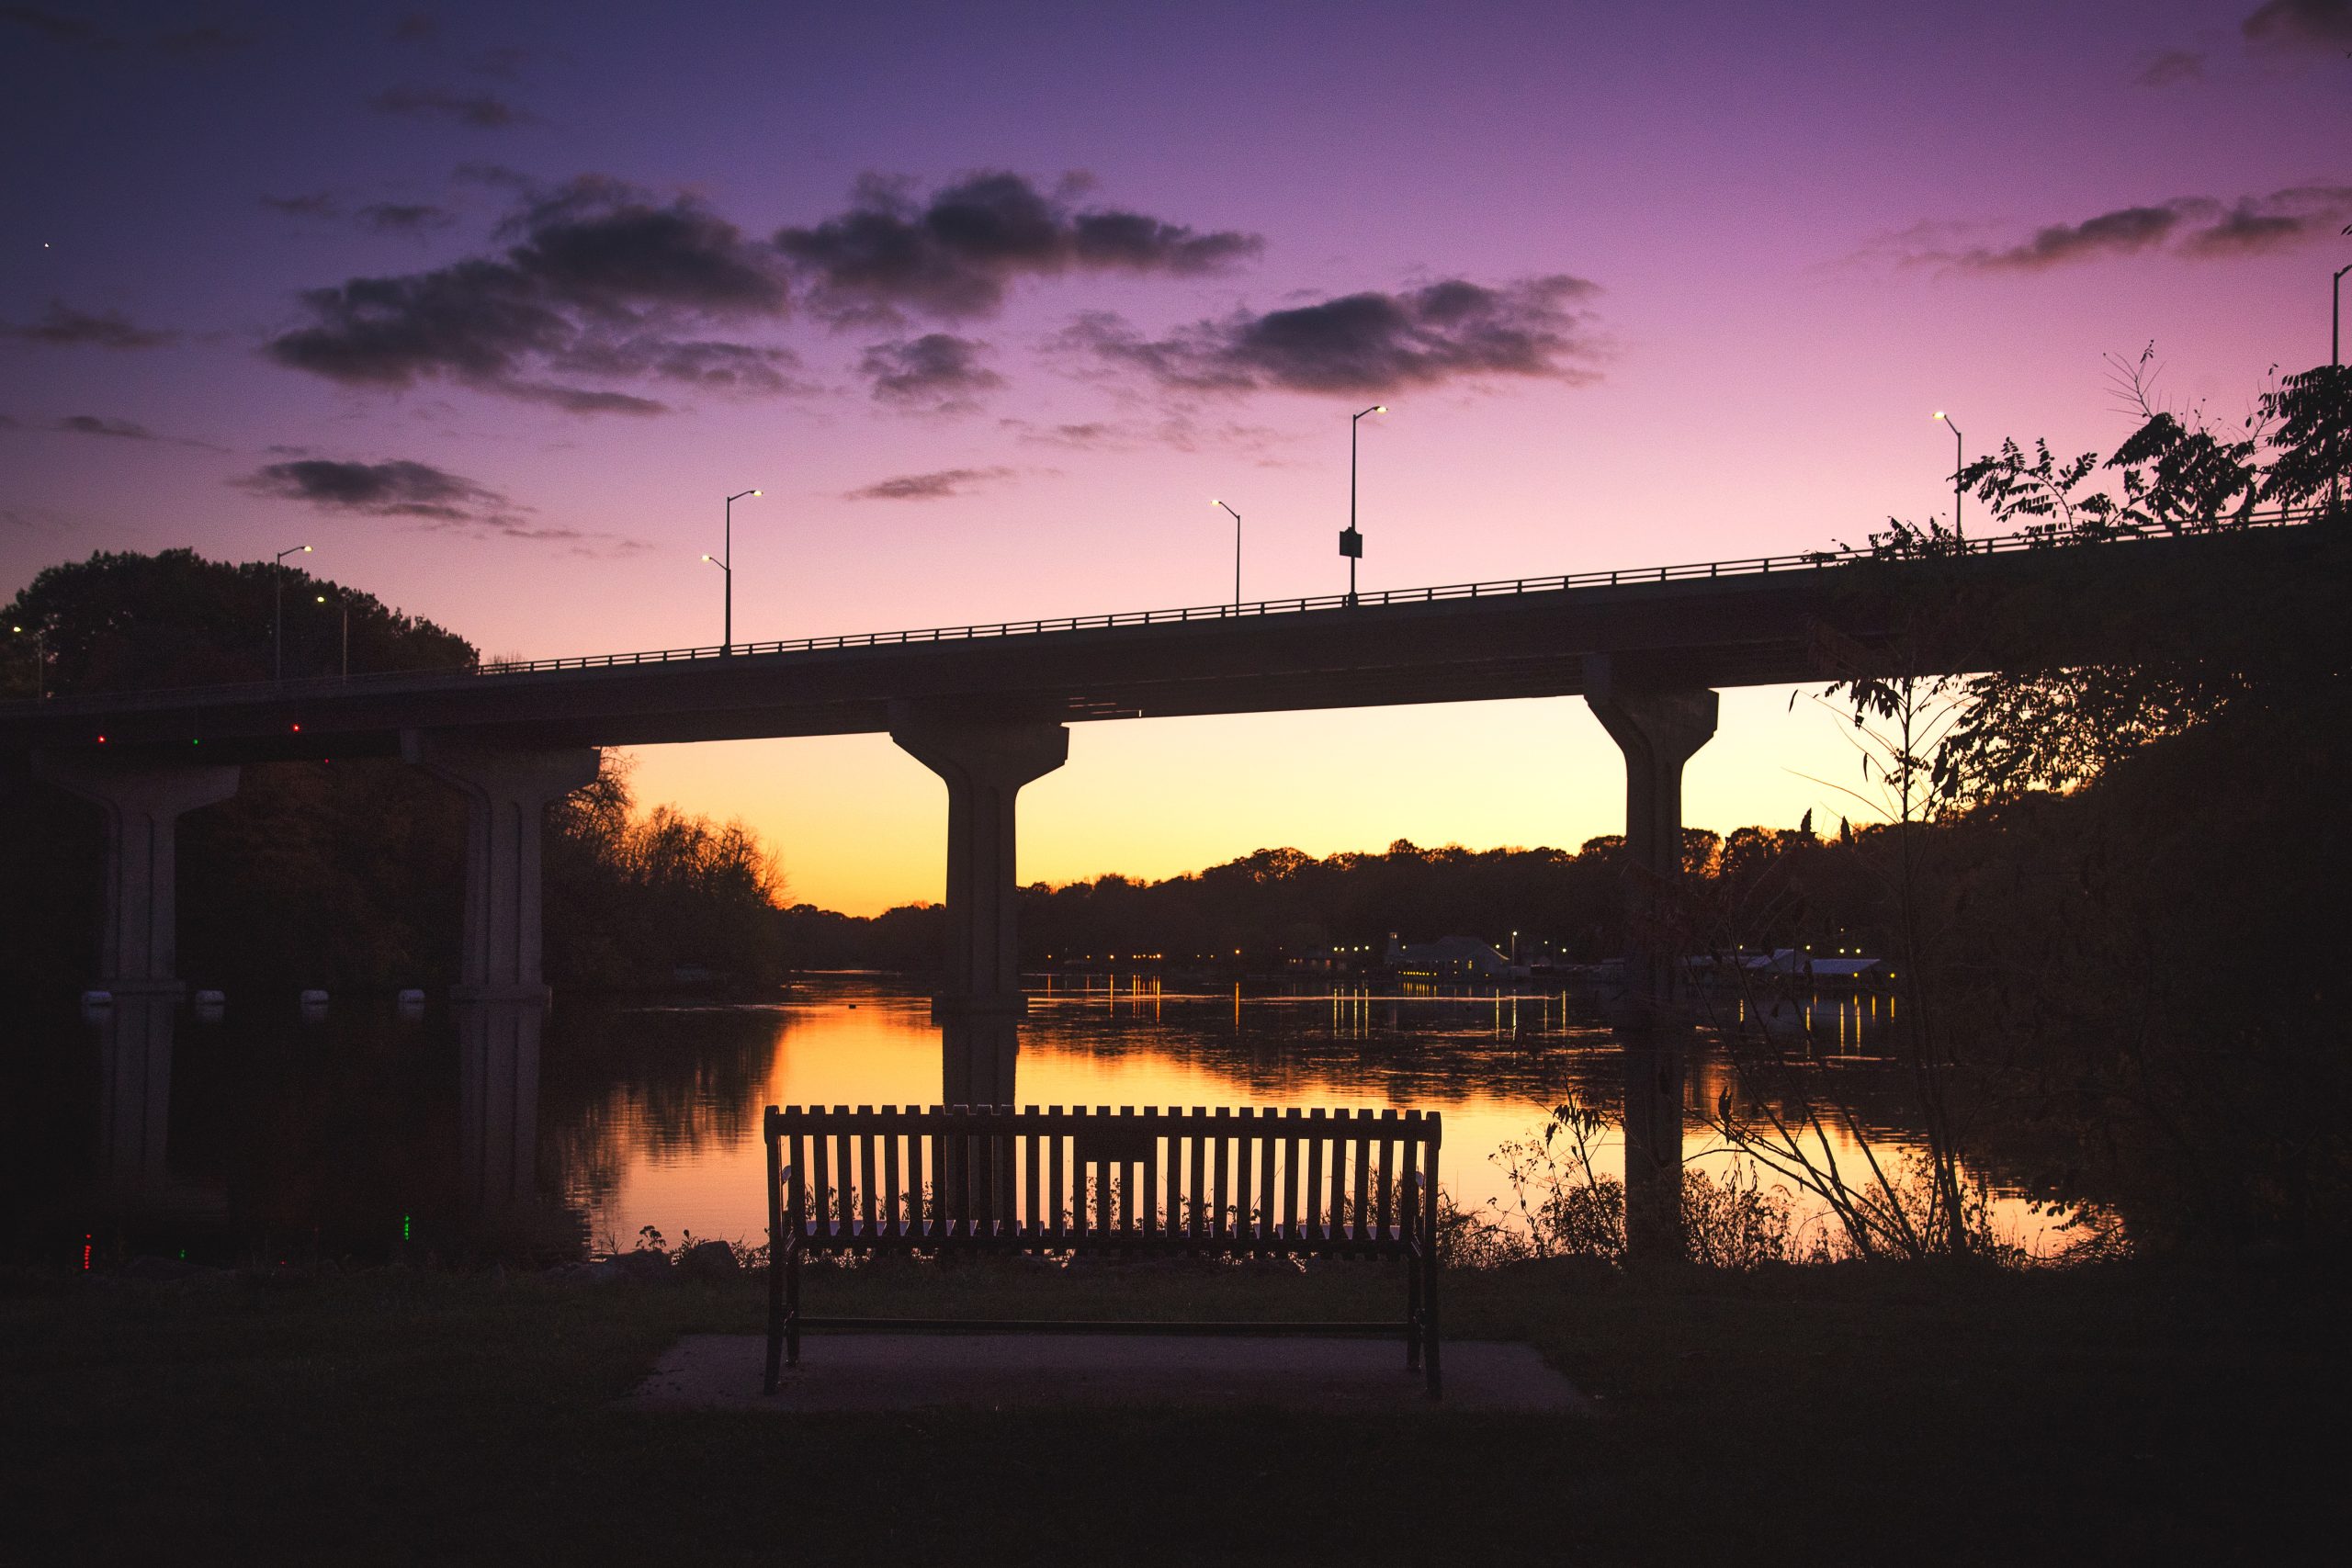 a bench sitting under a bridge next to a body of water